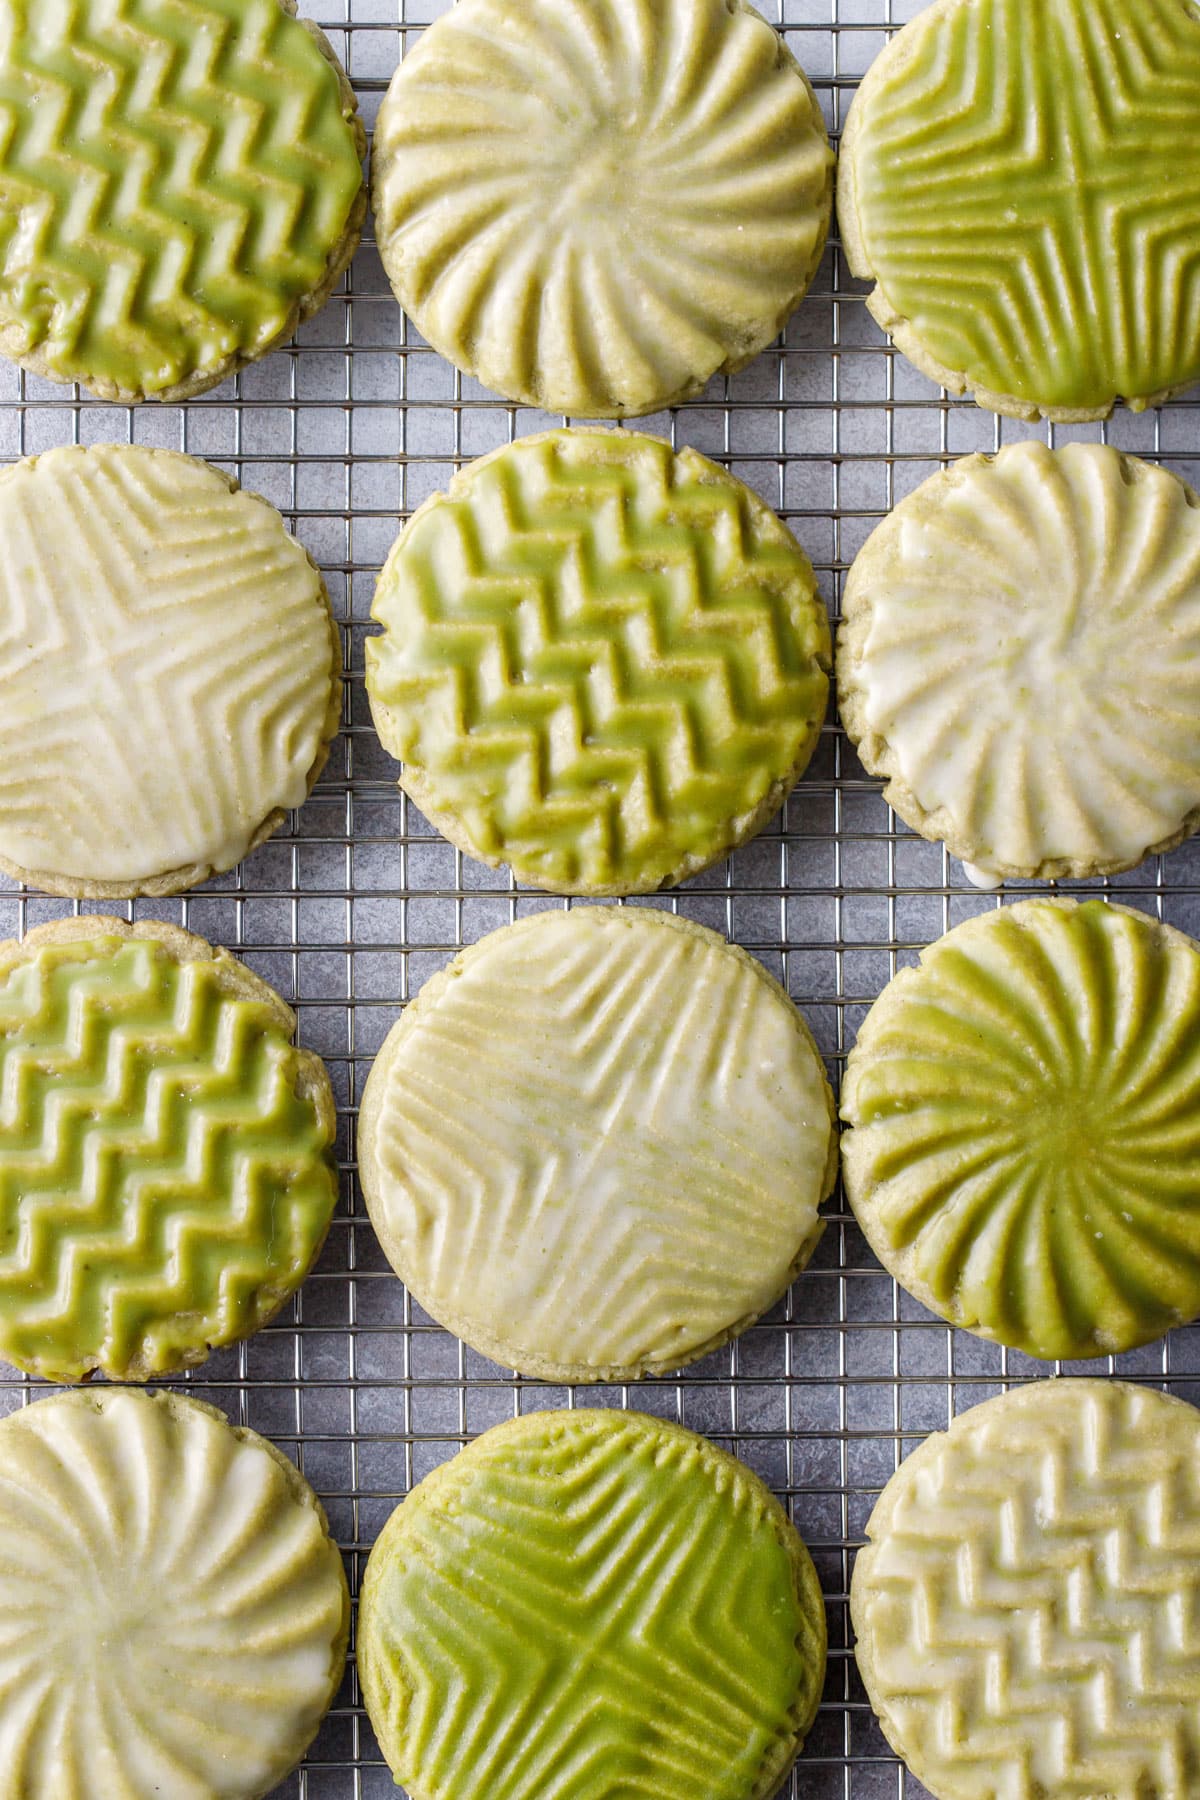 Overhead, wire rack with neat rows of Glazed Matcha Sugar Cookies with alternating white and green glazes and geometric designs.